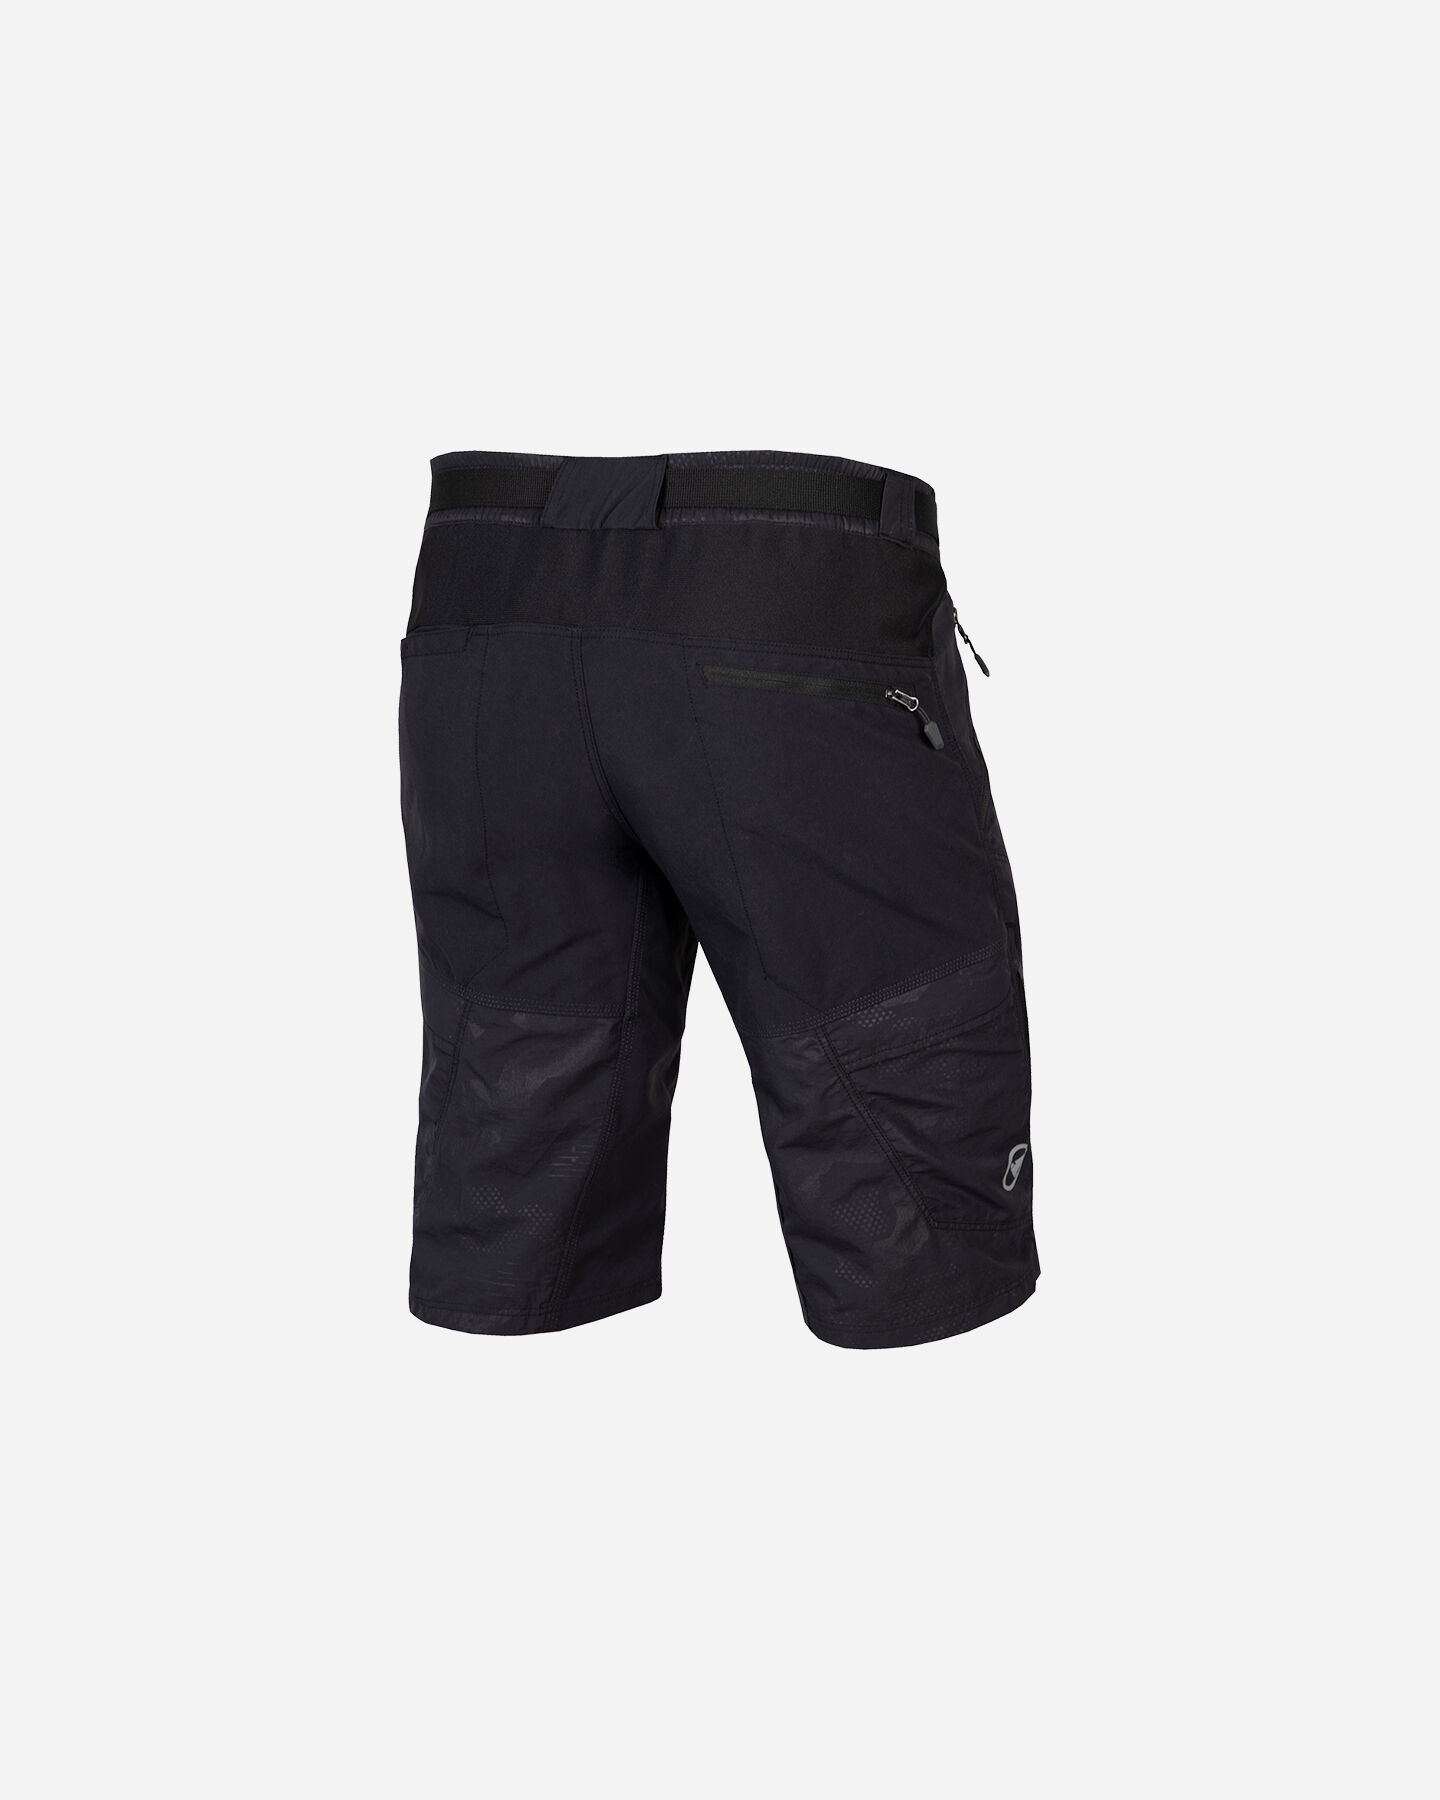  Short ciclismo ENDURA HUMMVEE WITH LINER M S4123647|1|S scatto 1